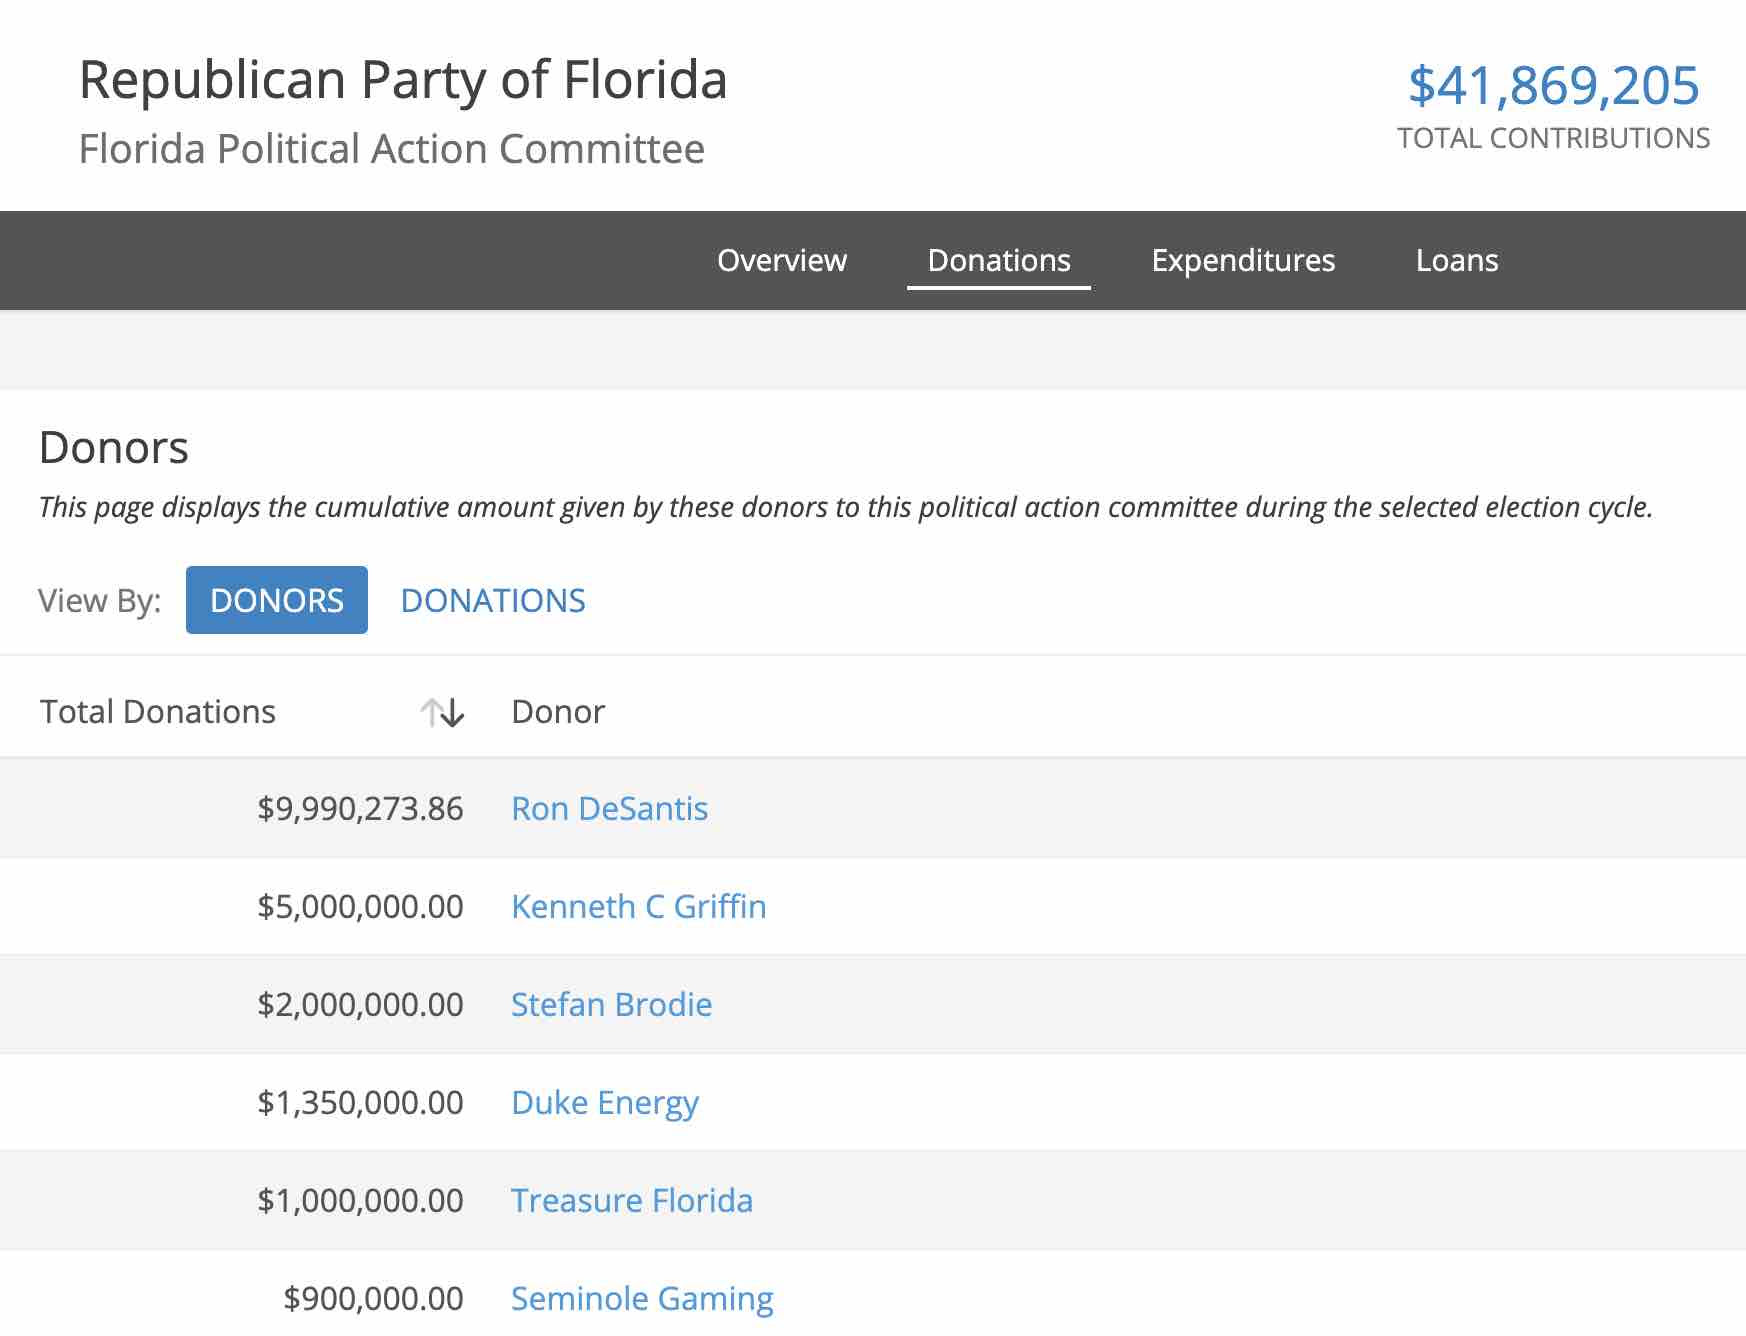 Dark money donations flood the Florida Republican Party including billionaires Kenneth Griffin and Stefan Brodie